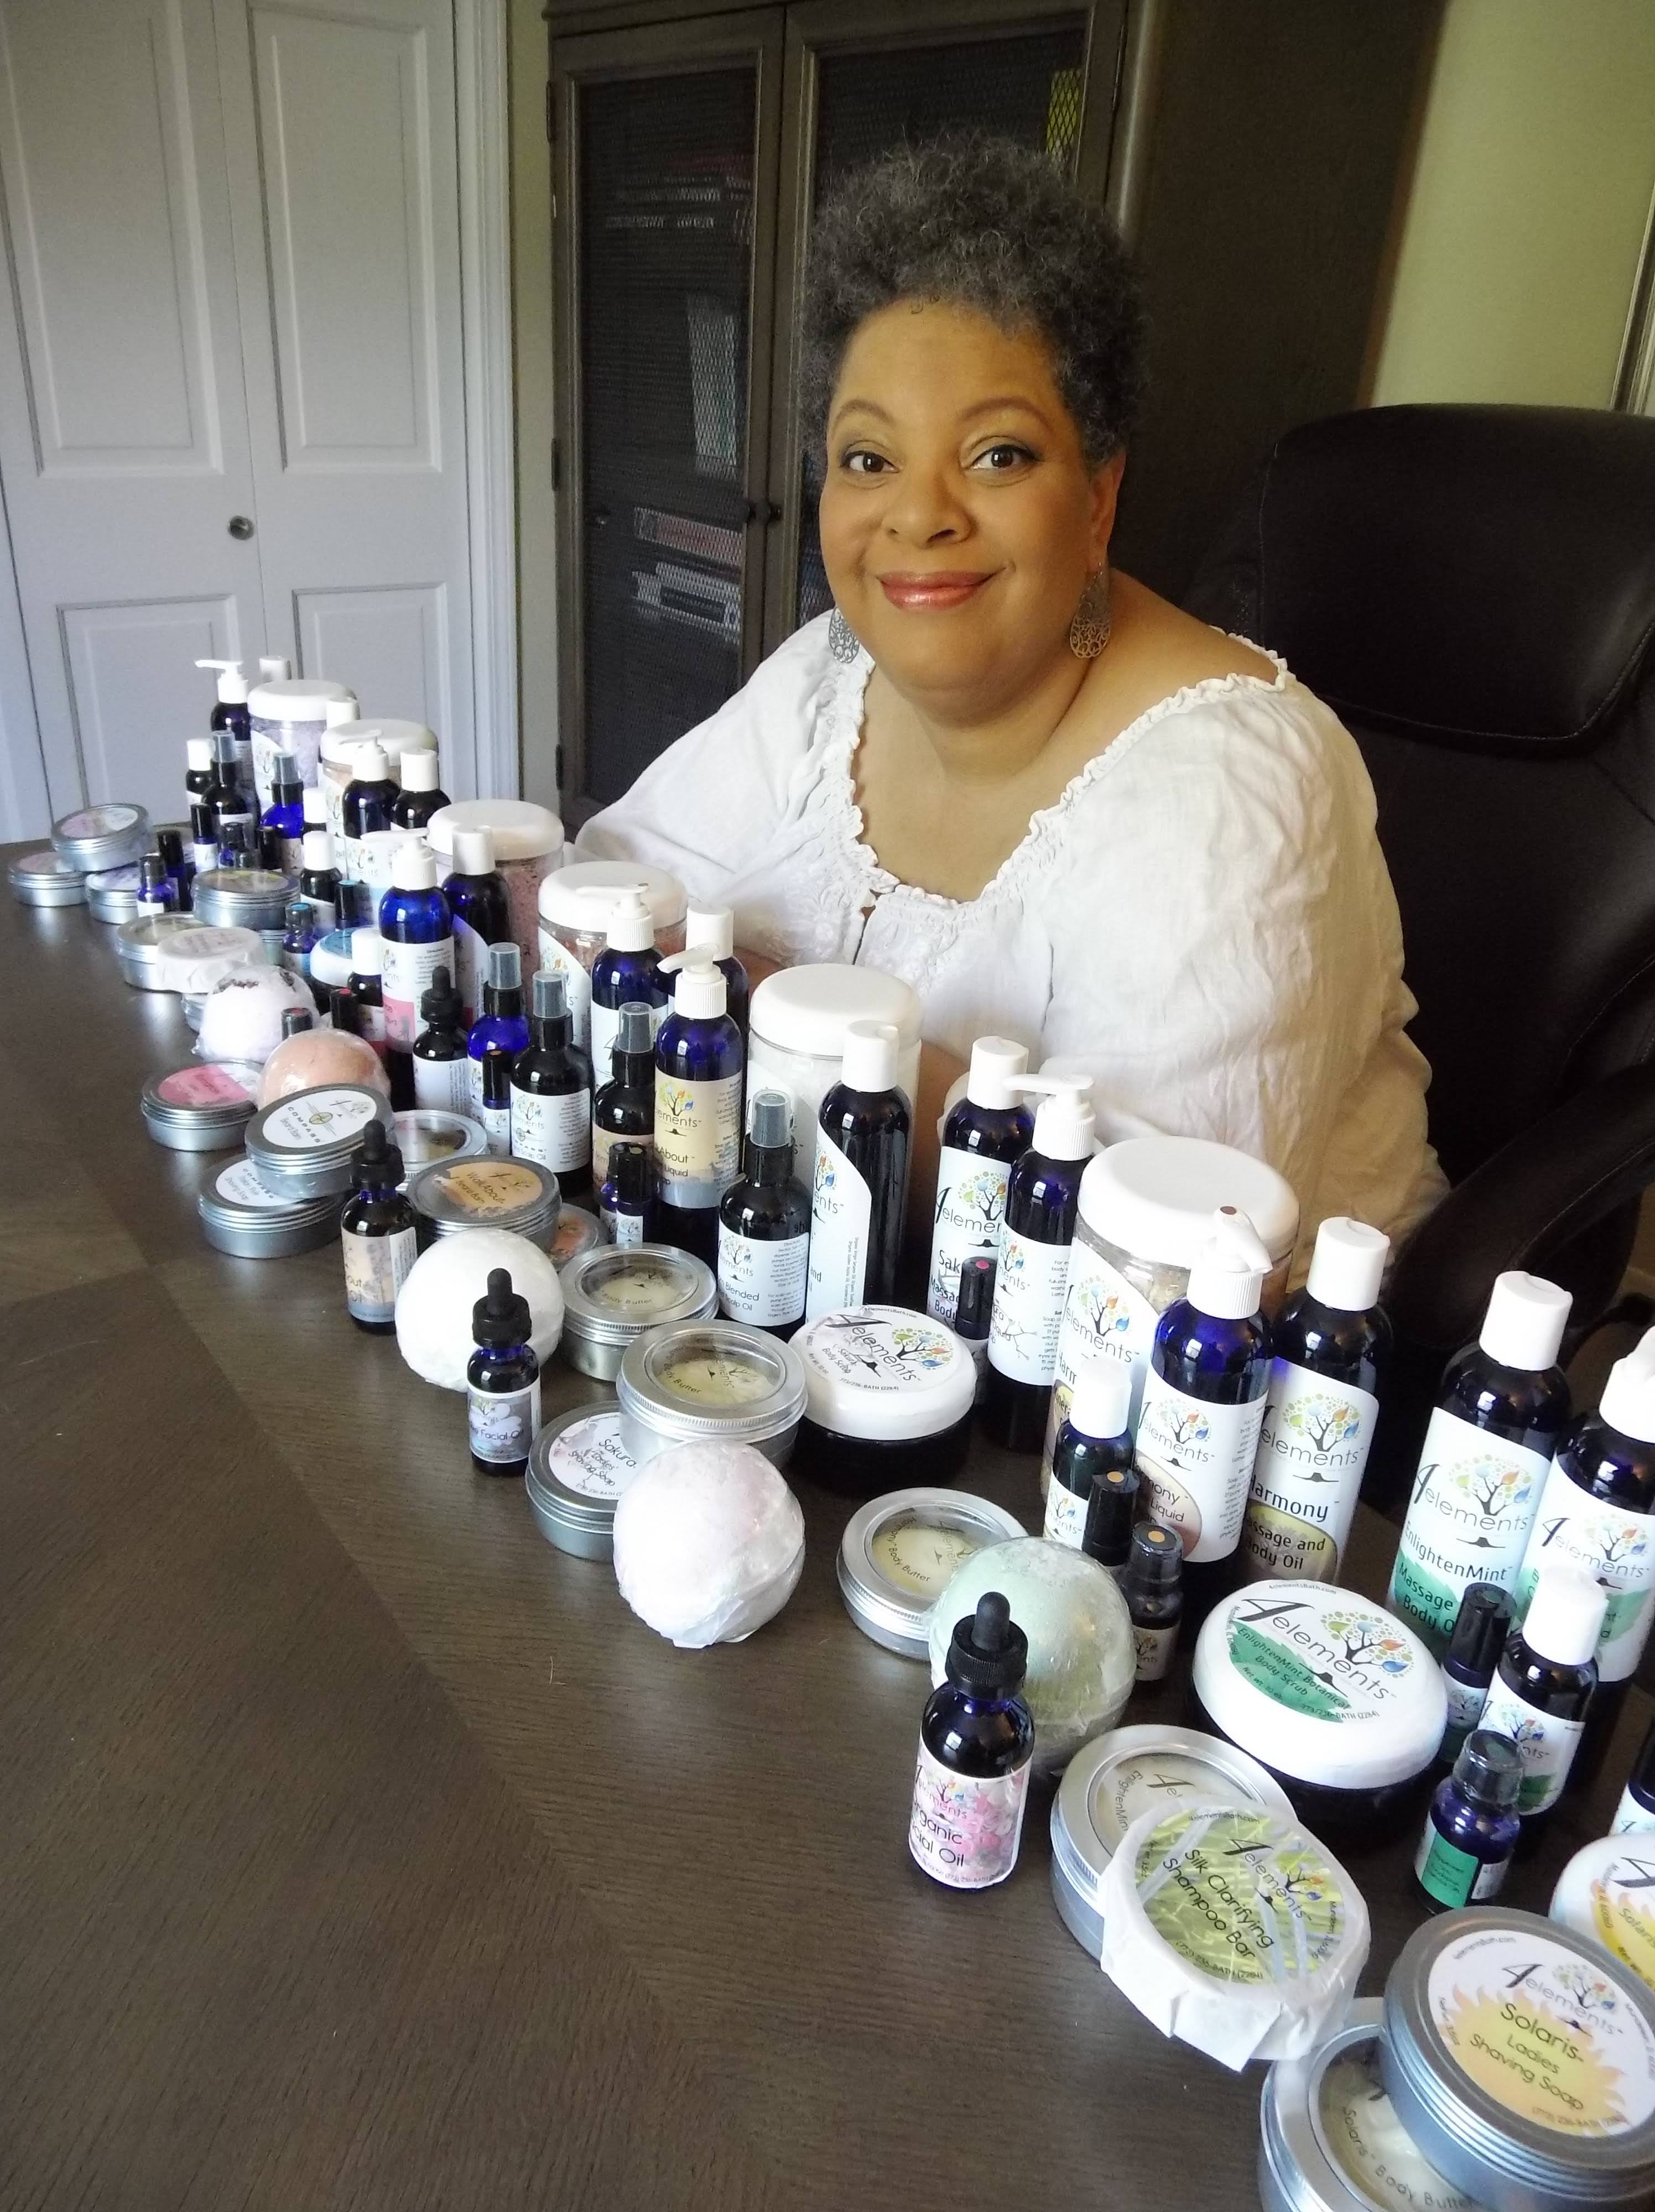 4Elements Founder Charise Cowan-Leroy smiling behind a spread of skincare products such as lotions, body butters, and castile soaps.